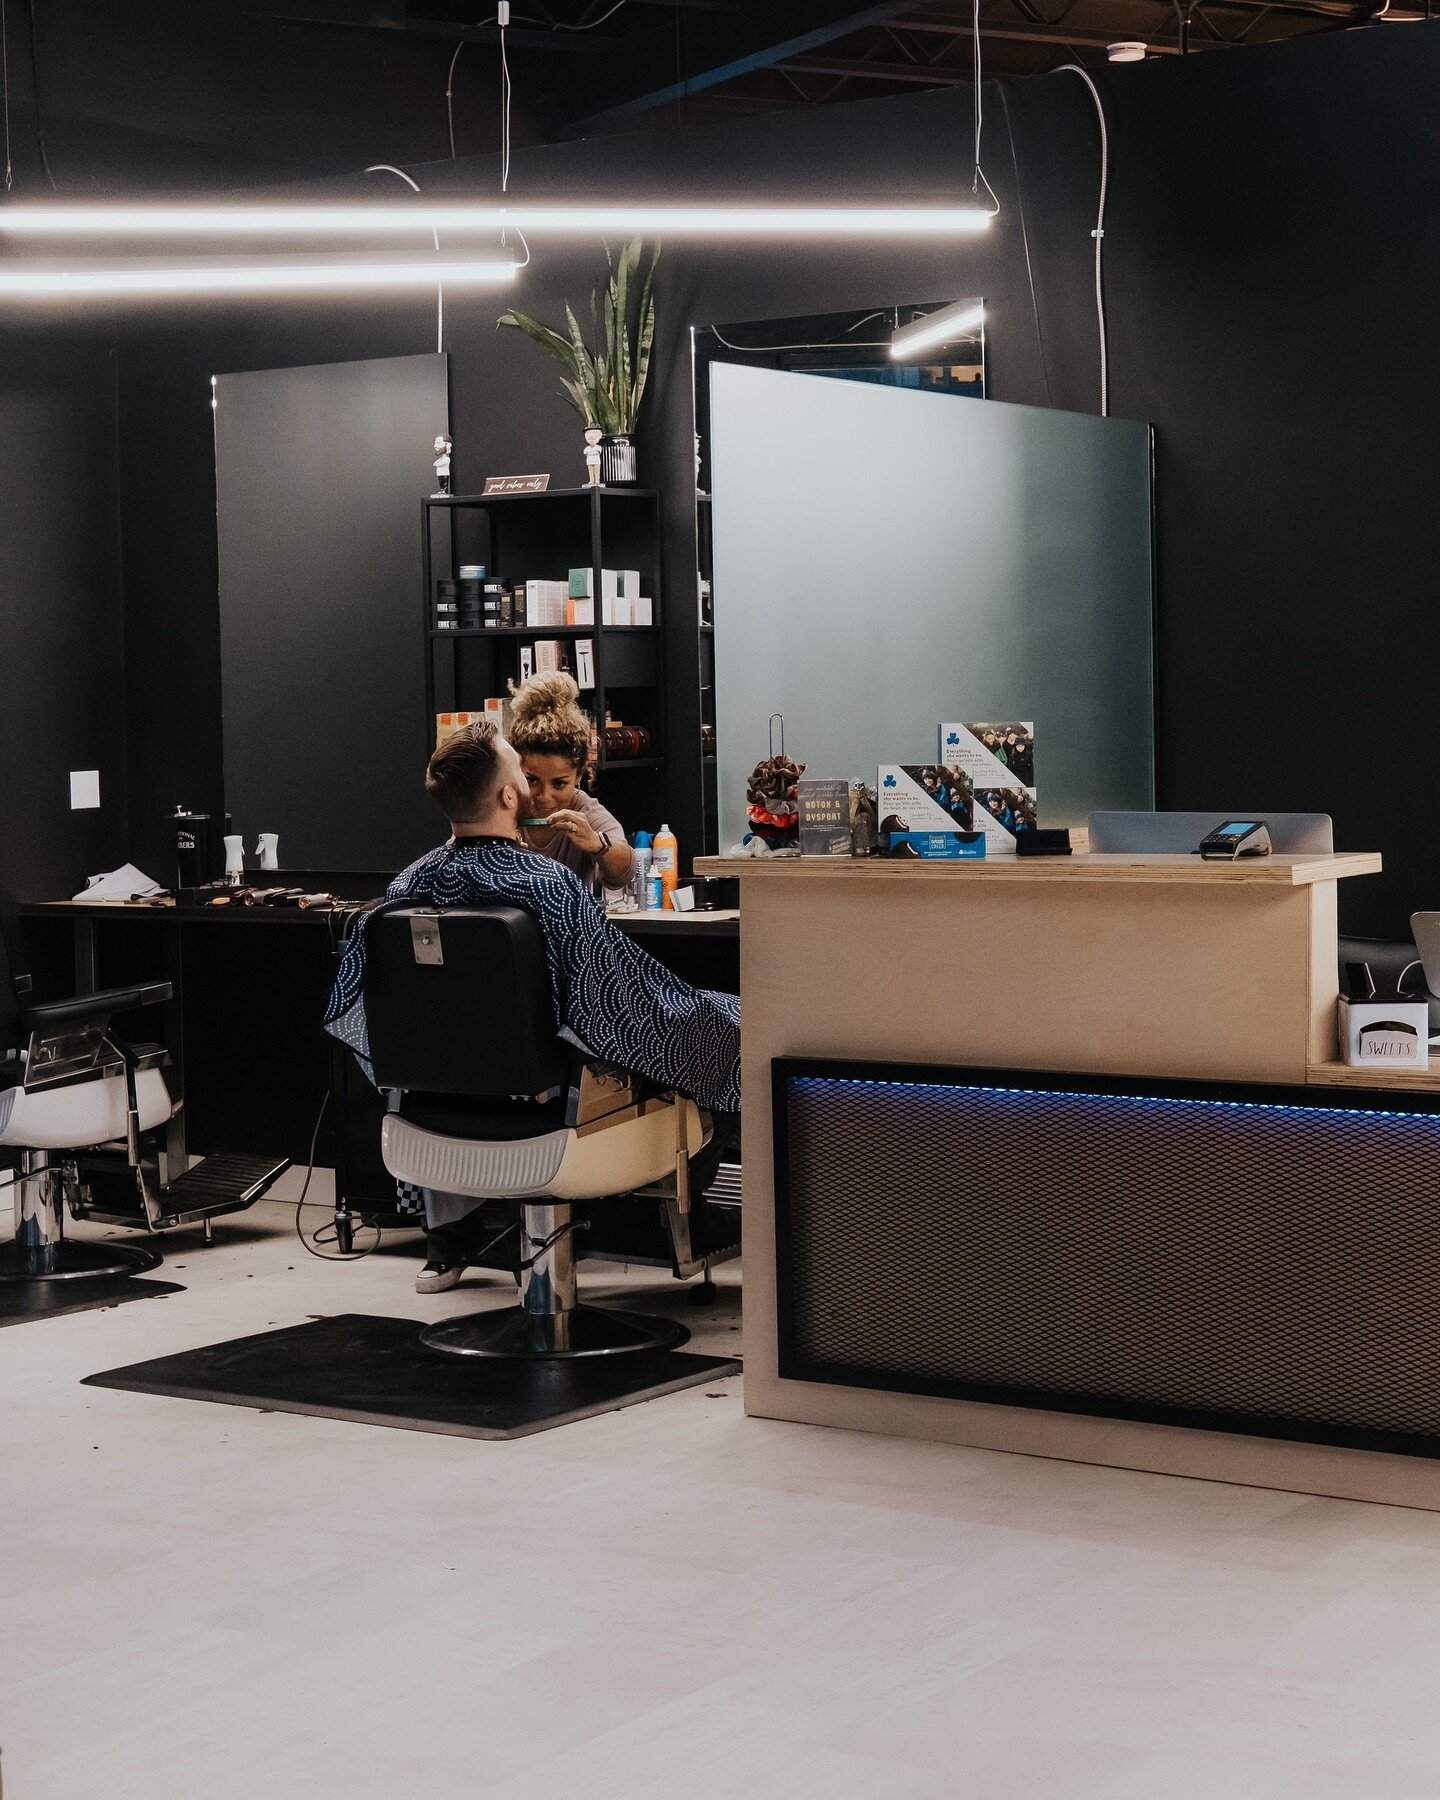 Barber Services
➖
From precision cuts to tailored trims, every visit will leave you feeling 10/10. 
 
Did you know you can book reoccurring appointments to take away the hassle of getting in last minute? Check in with our receptionist next time you&r